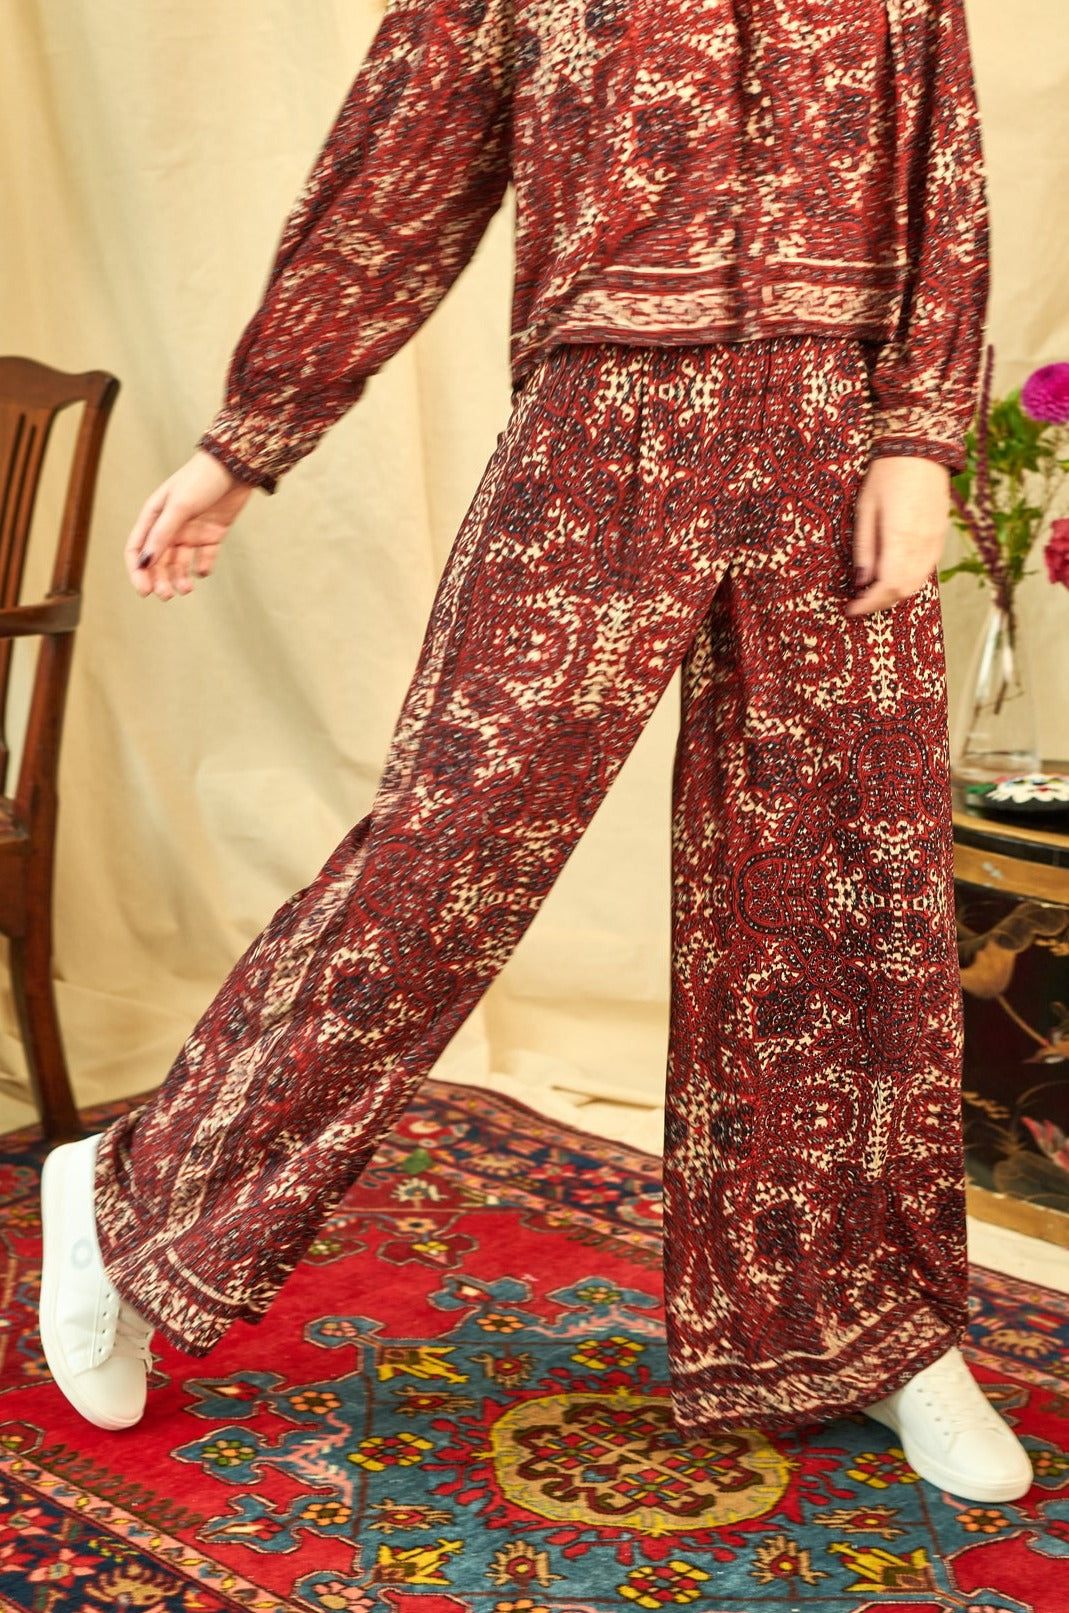 Tibile Trousers